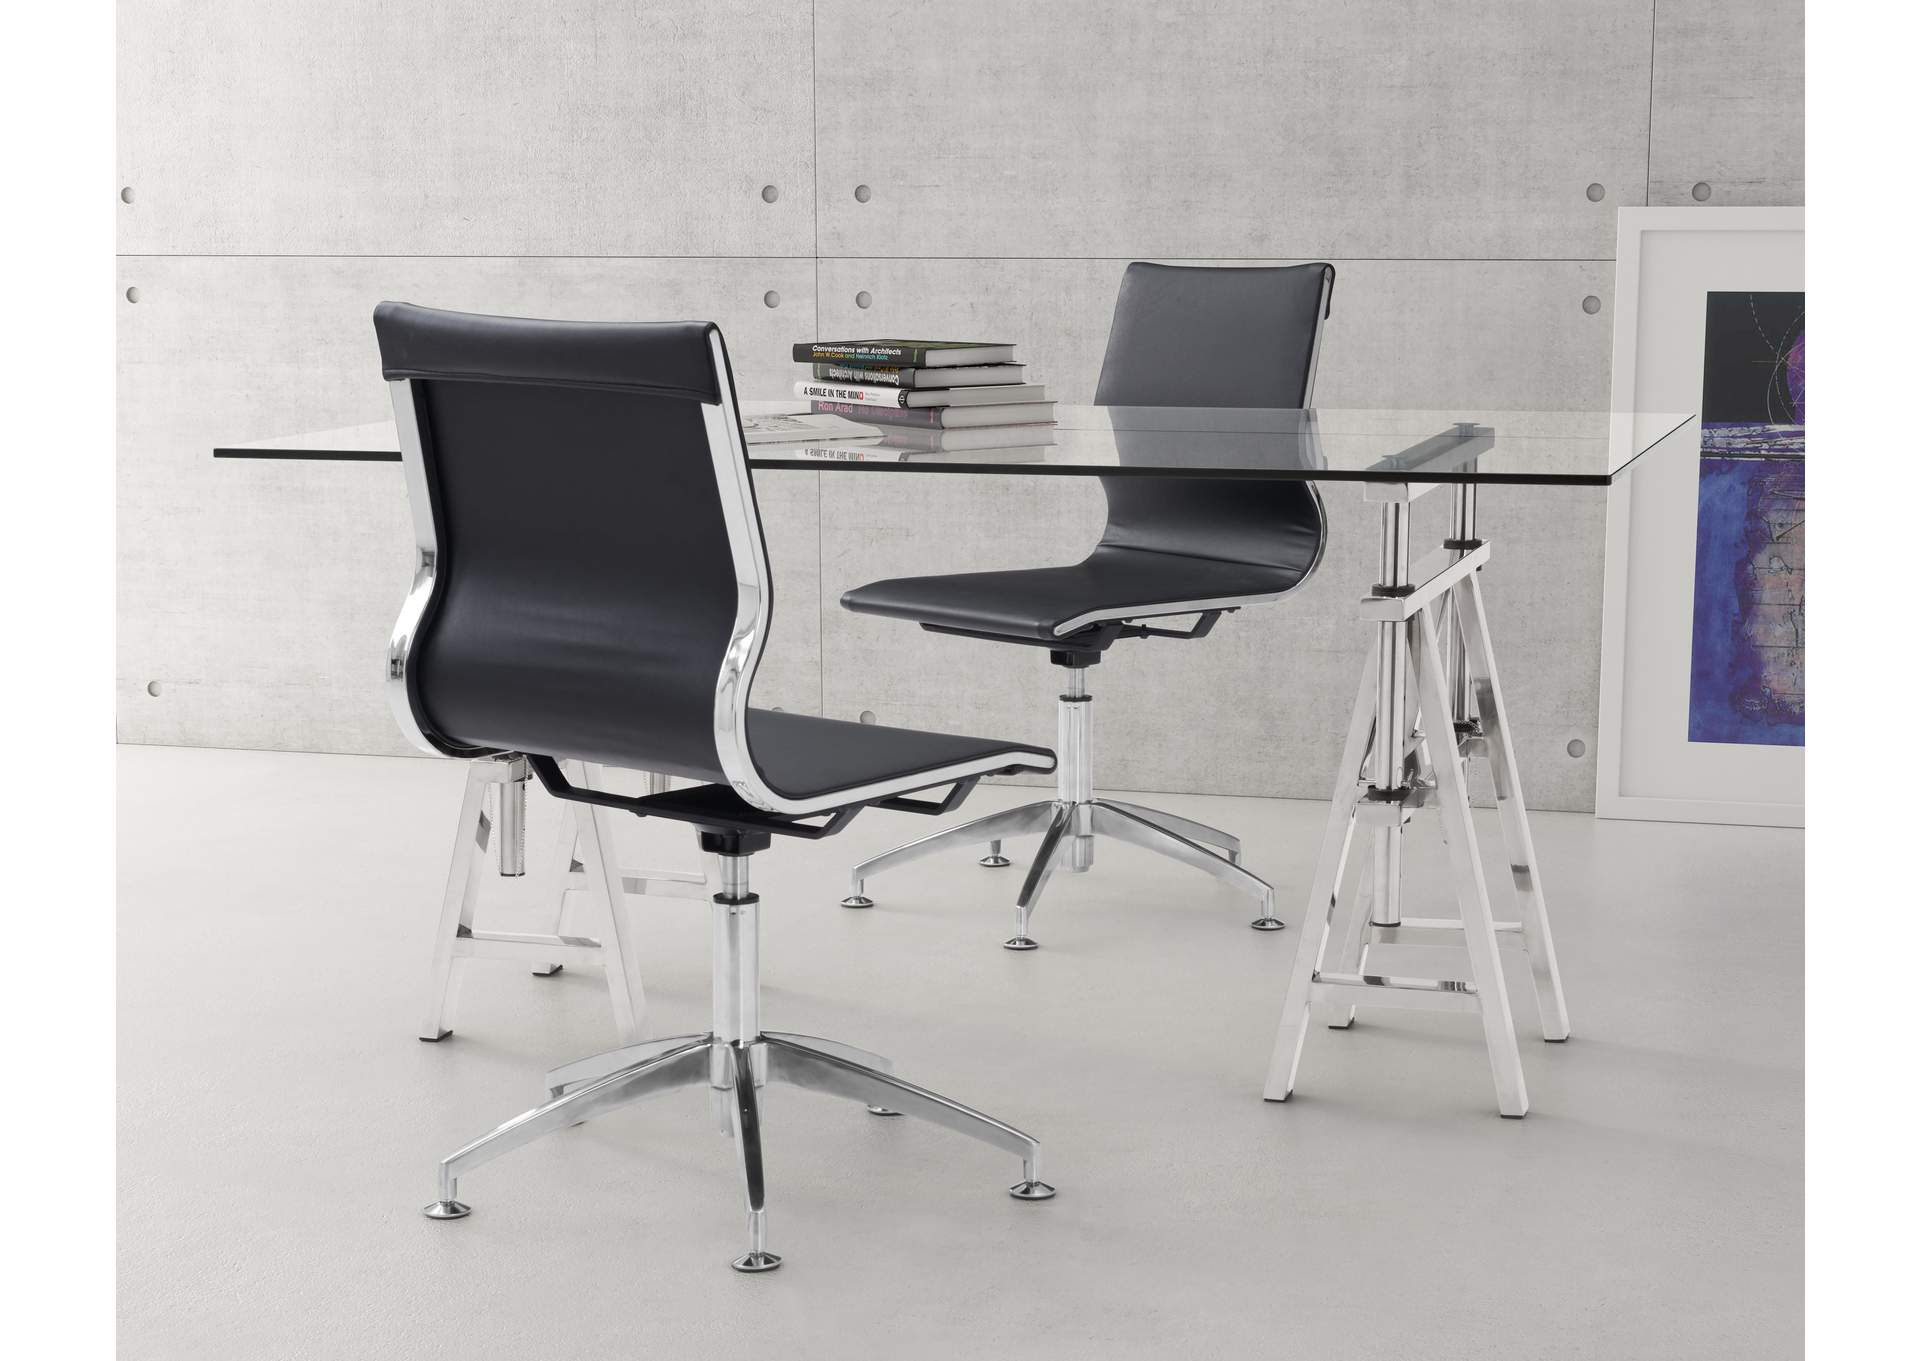 Glider Conference Chair Black,Zuo